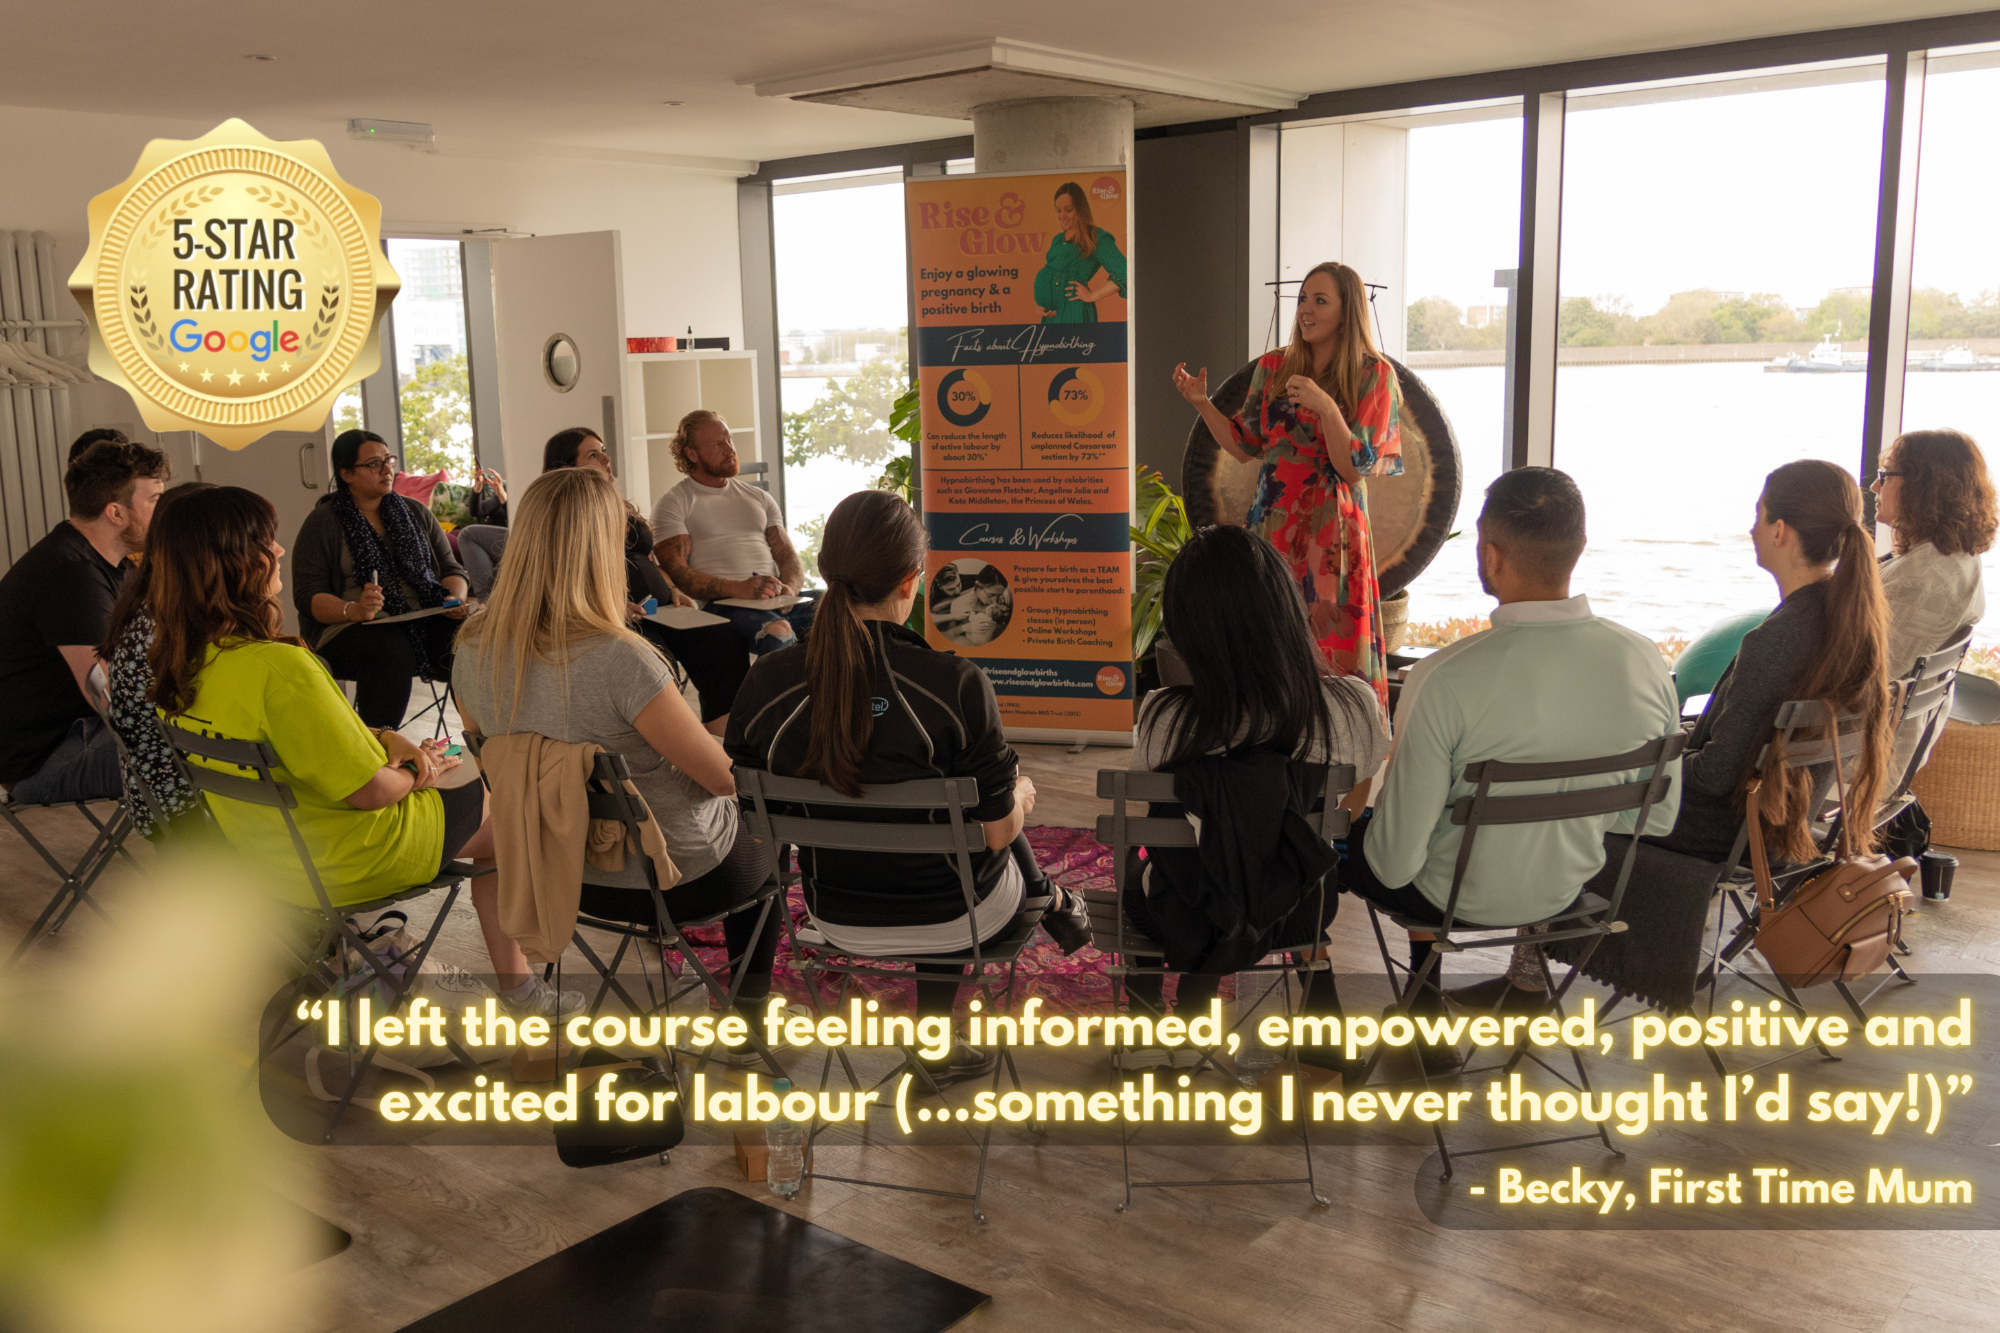 Group hypnobirthing classes in Bexley and Greenwich